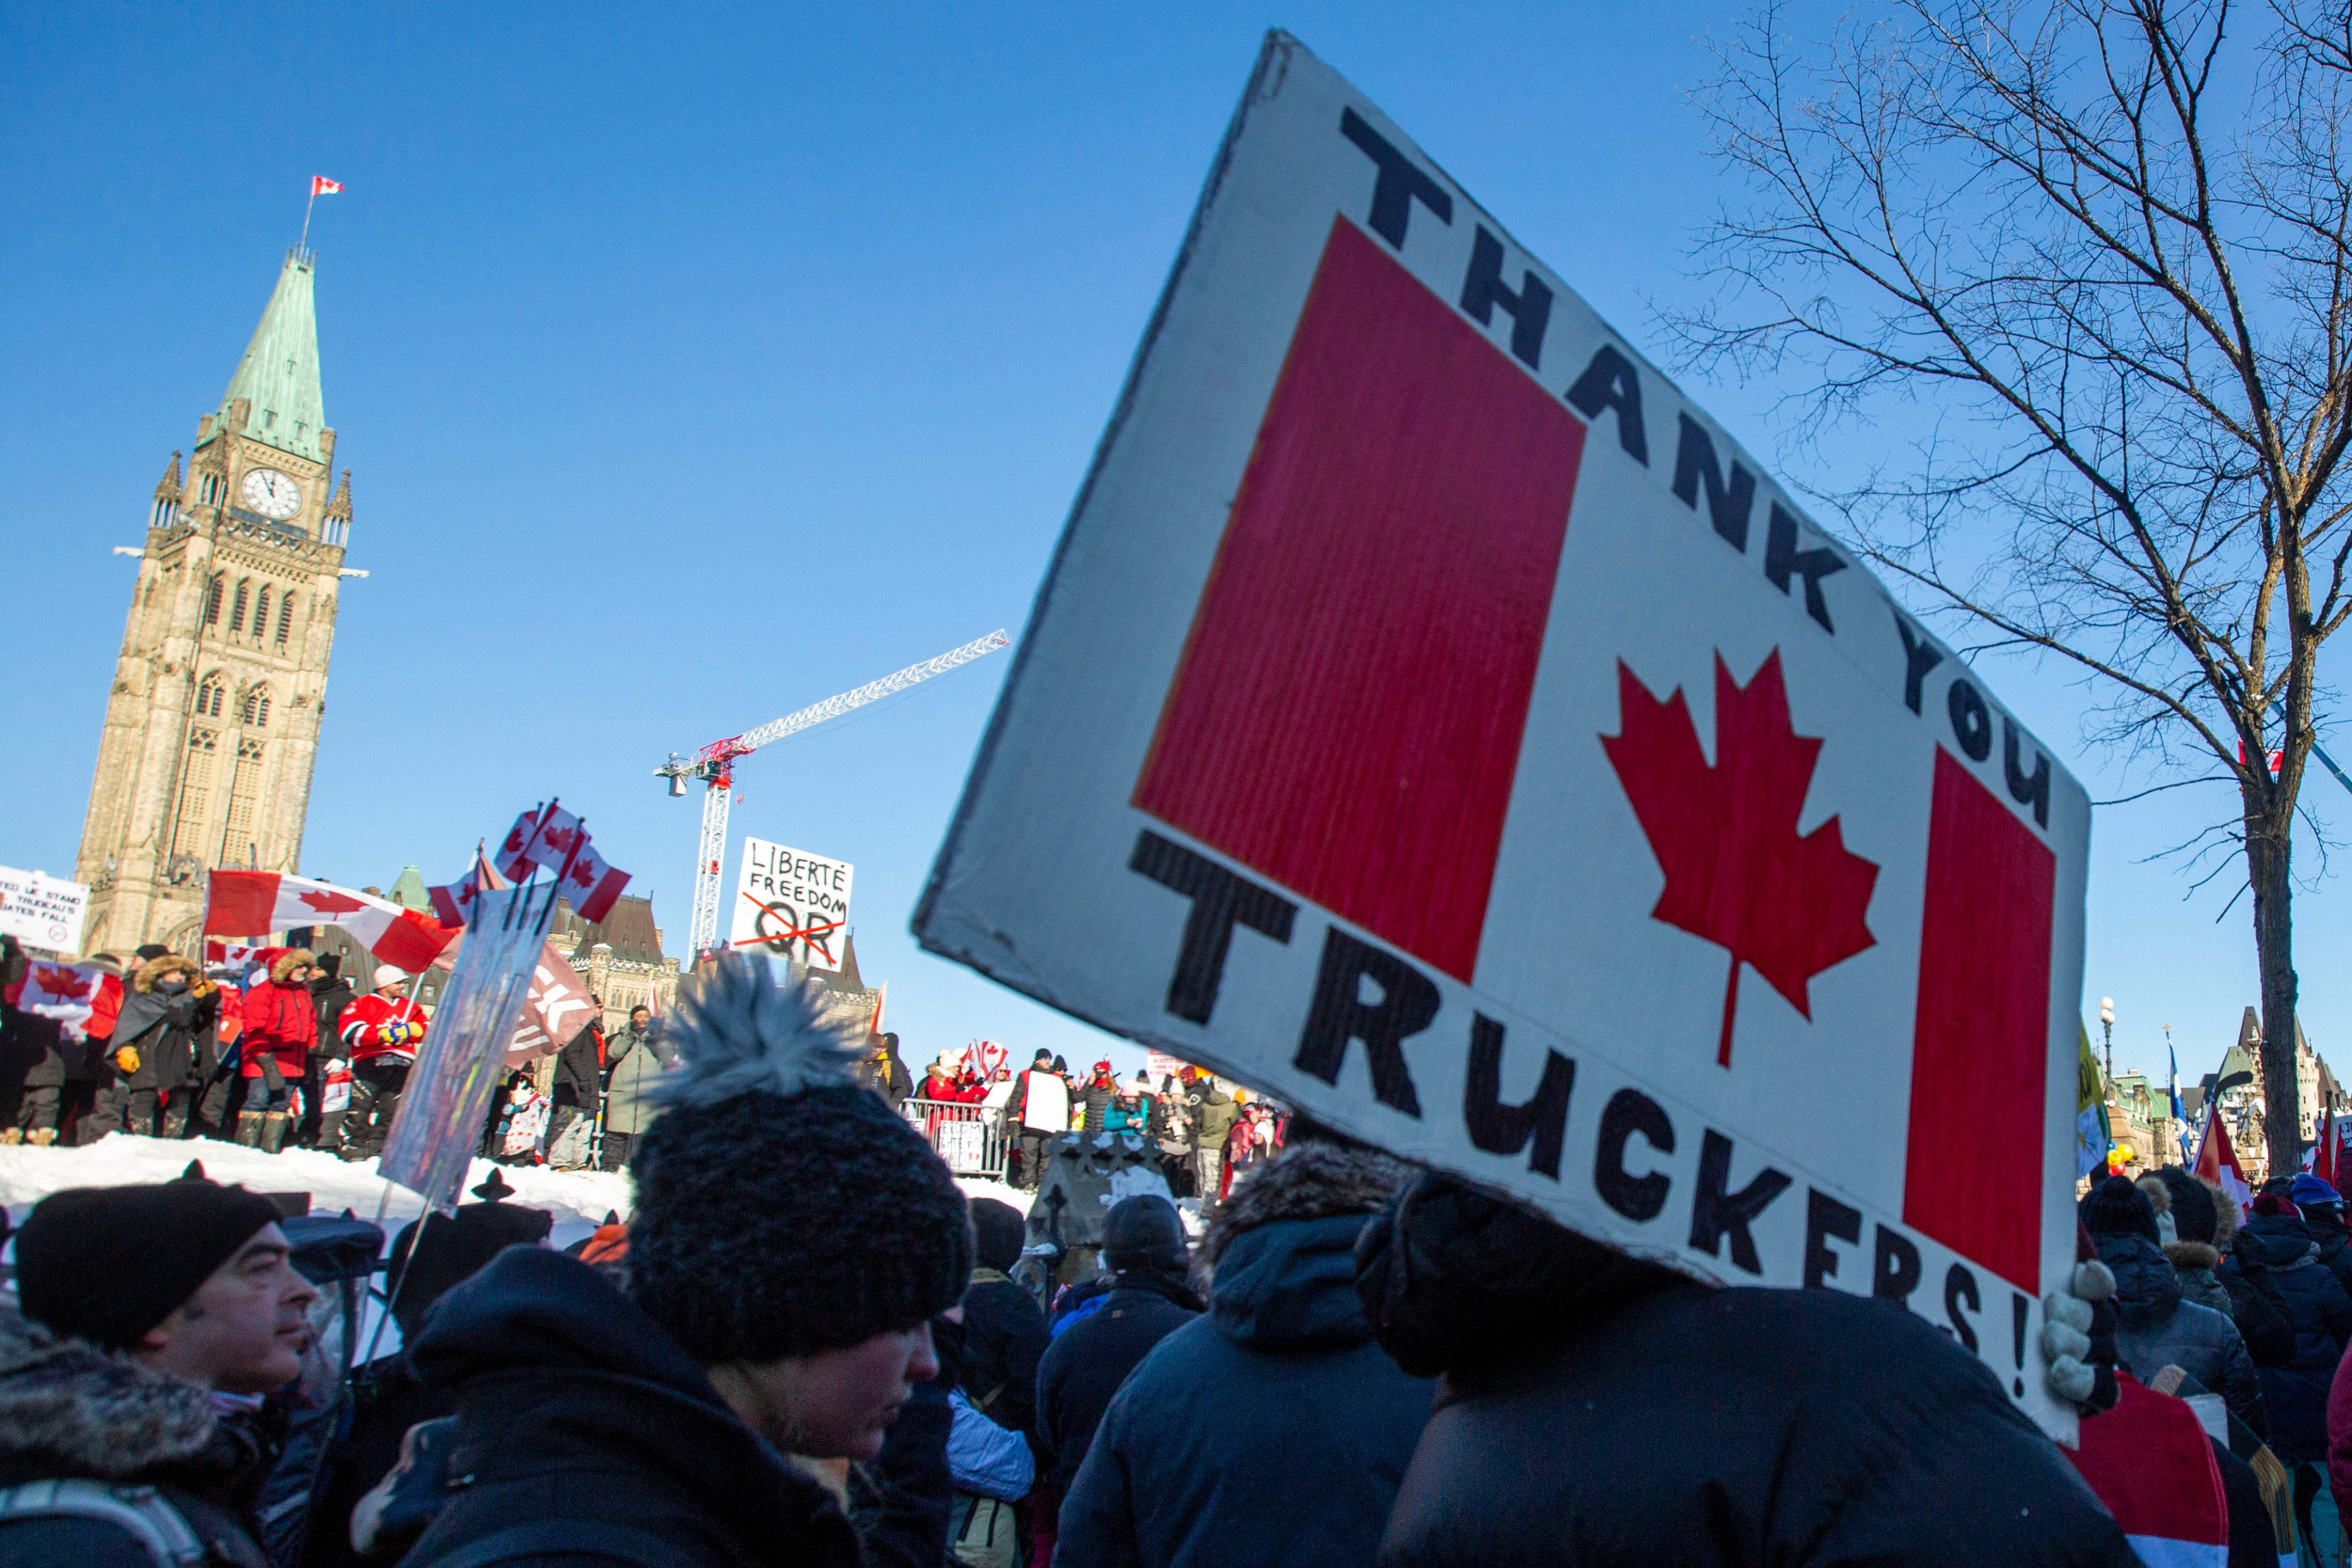 Canadian Trucker Protest Live Updates All Options on the Table to End